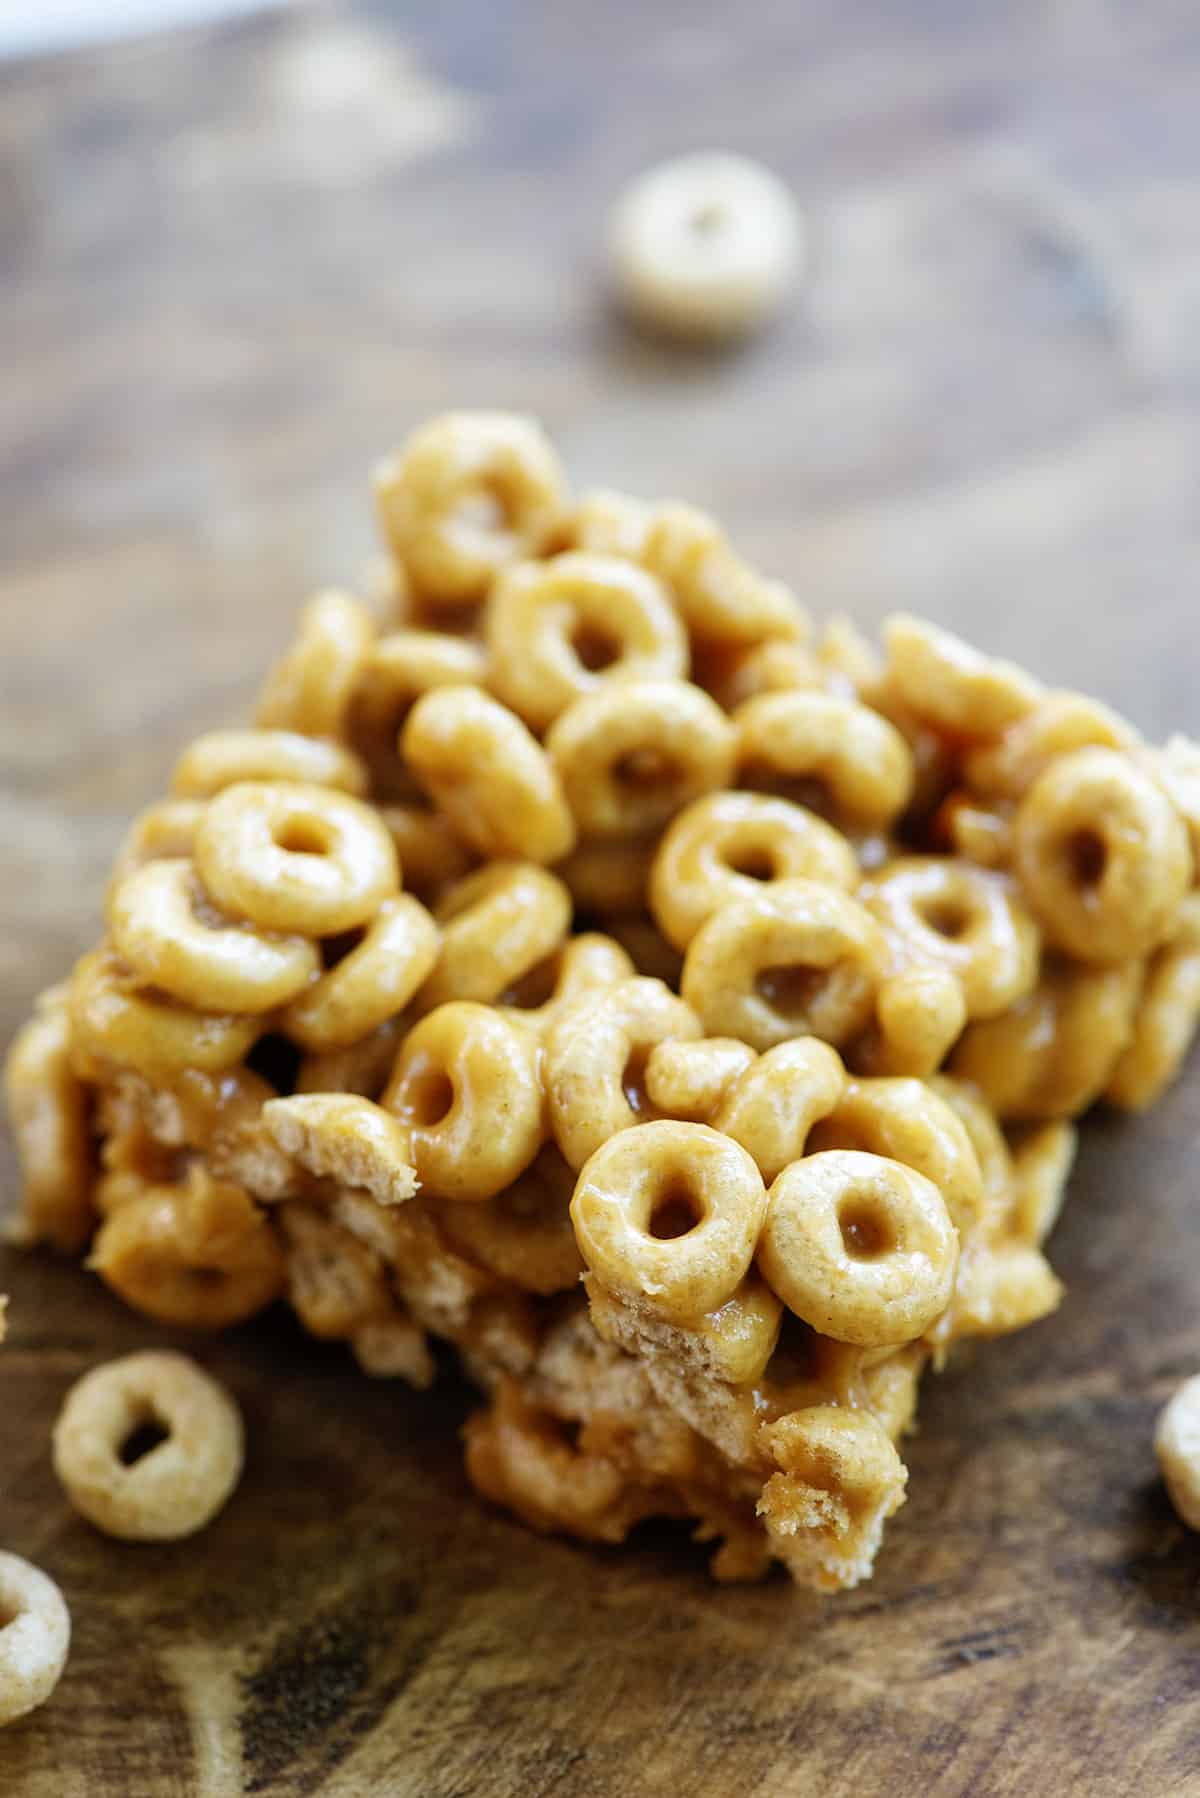 peanut butter cereal bar on wooden board.